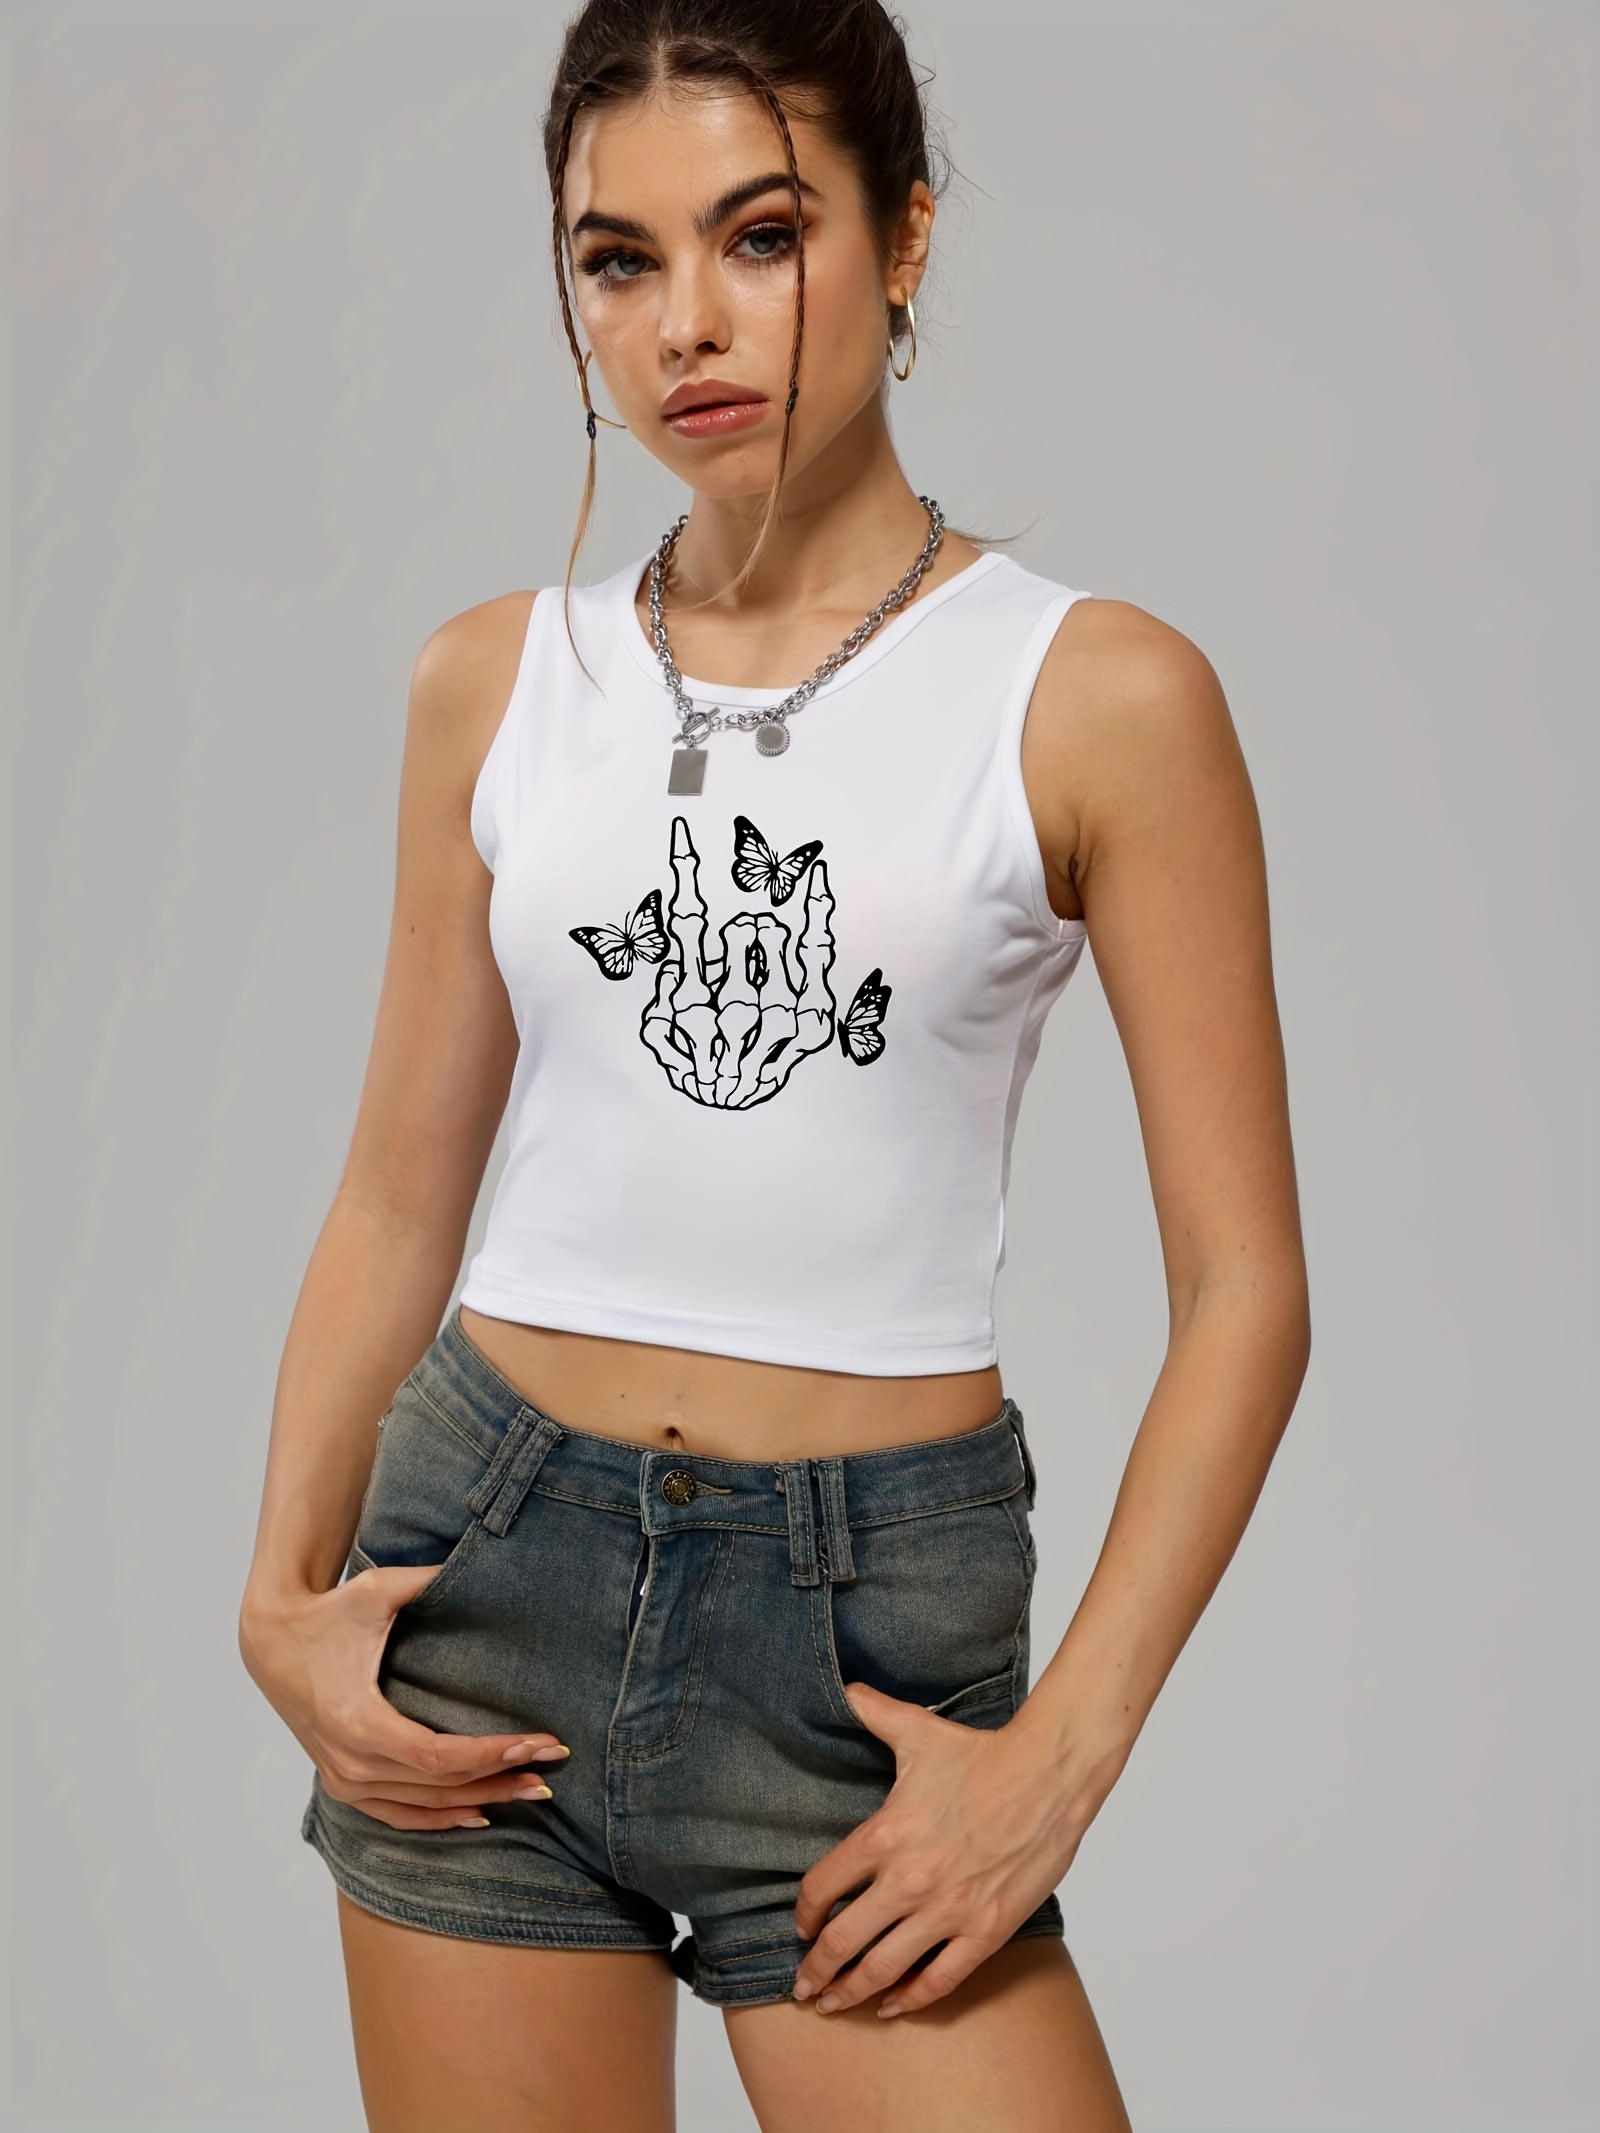 POTO Crop Top Athletic Shirts for Women Cute Sleeveless Yoga Tops Running  Workout Shirt Summer Tank Tops for Women Loose Fit